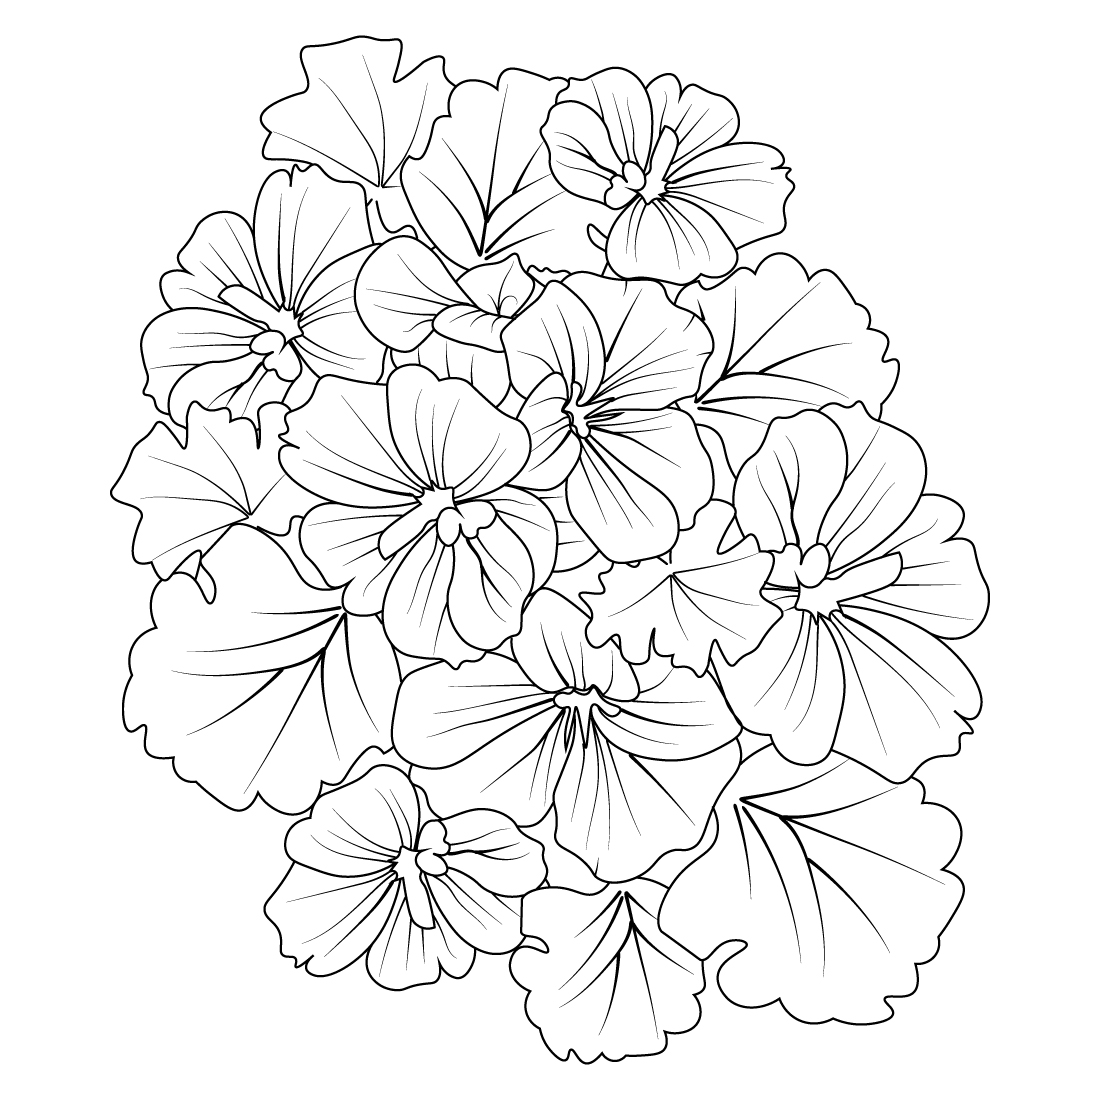 flower cluster drawing Easy flower coloring pages, Cute flower coloring pages, flower coloring page for adults, Realistic flower coloring pages, vintage floral vector illustration preview image.